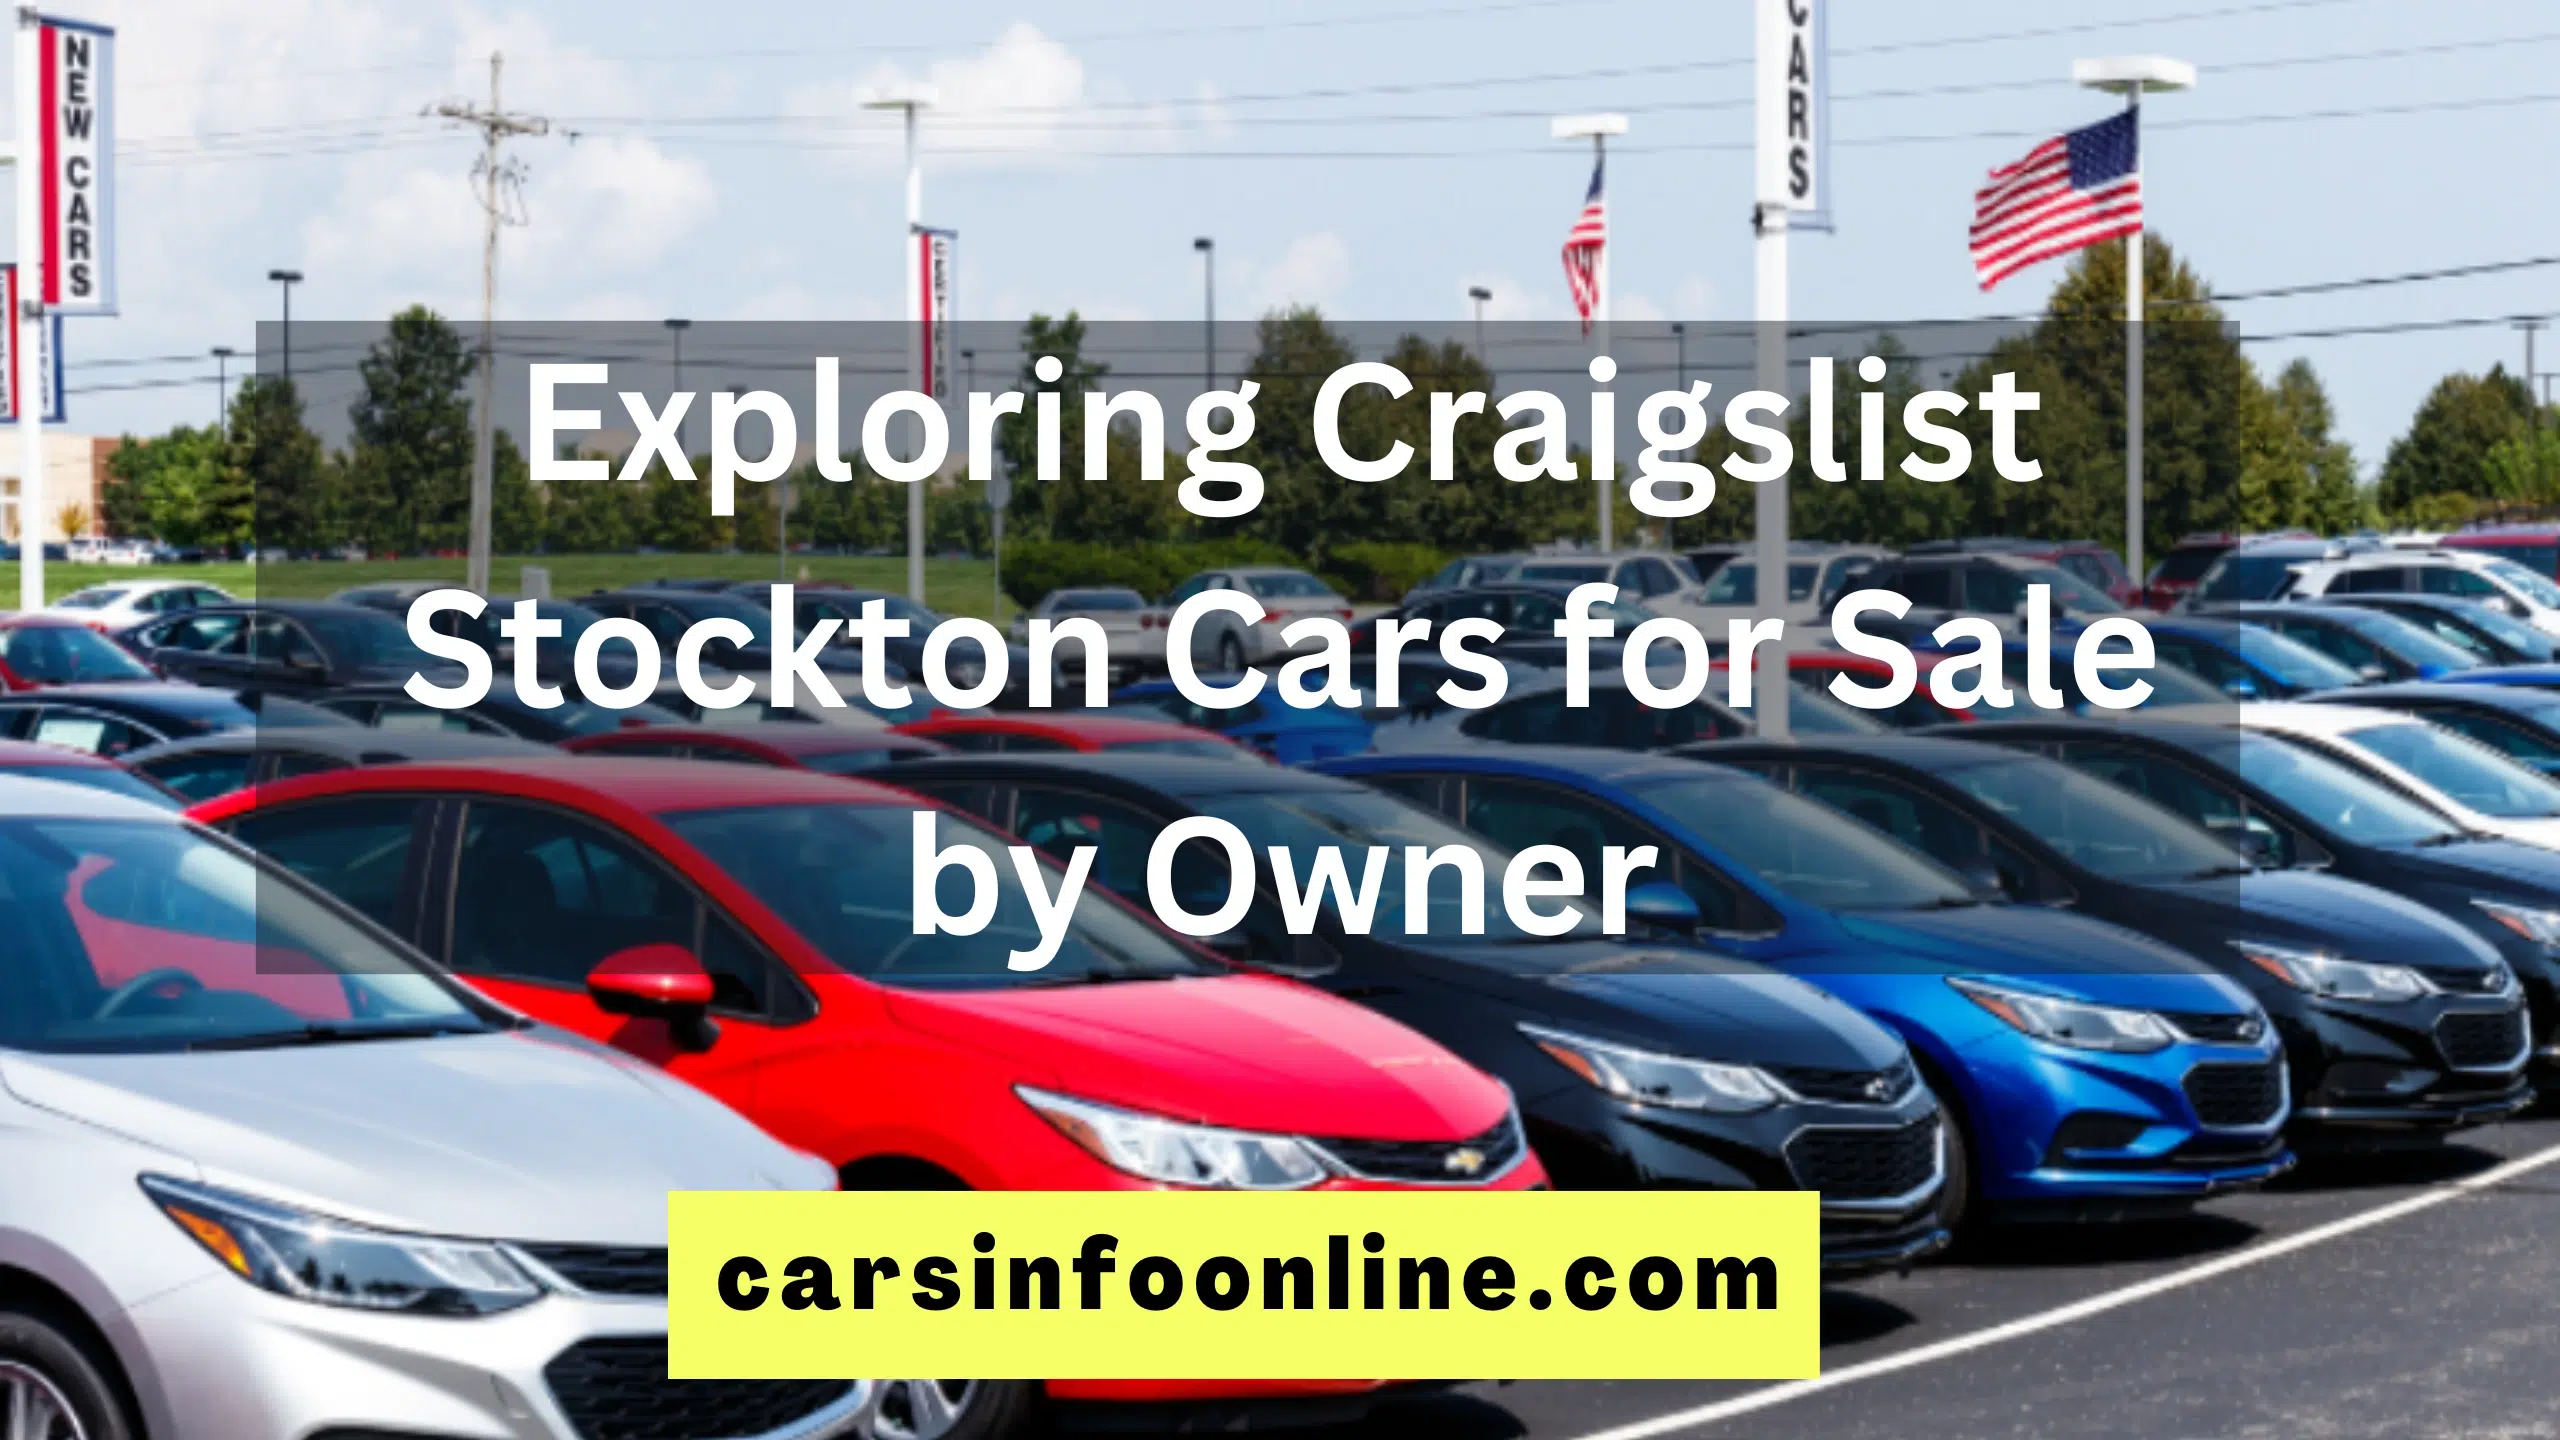 Exploring Craigslist Stockton Cars for Sale by Owner